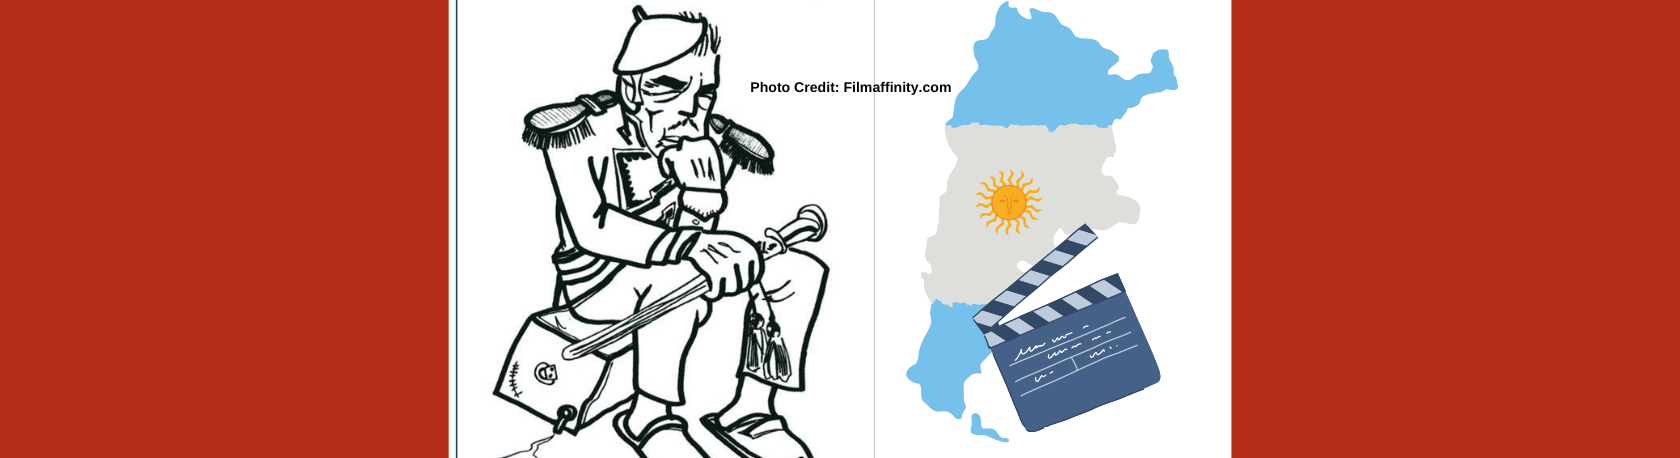 Did you know that the world’s first animated feature film was made in Argentina? - Easy Español